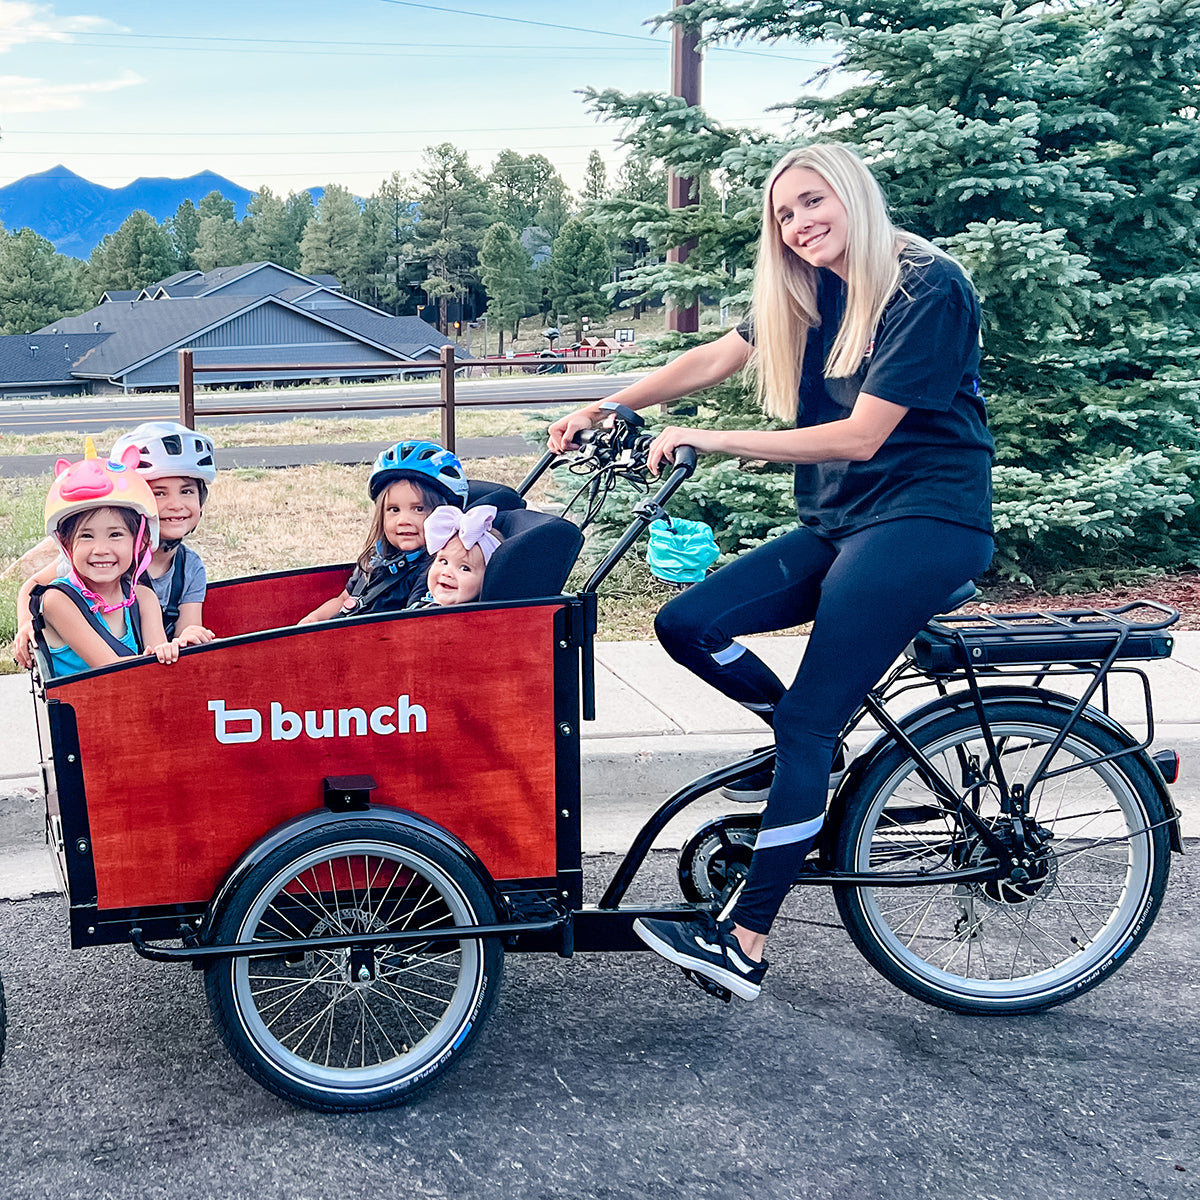 Trike　Electric　Cargo　Load　Front　Bike　Family　The　Kids　Original:　for